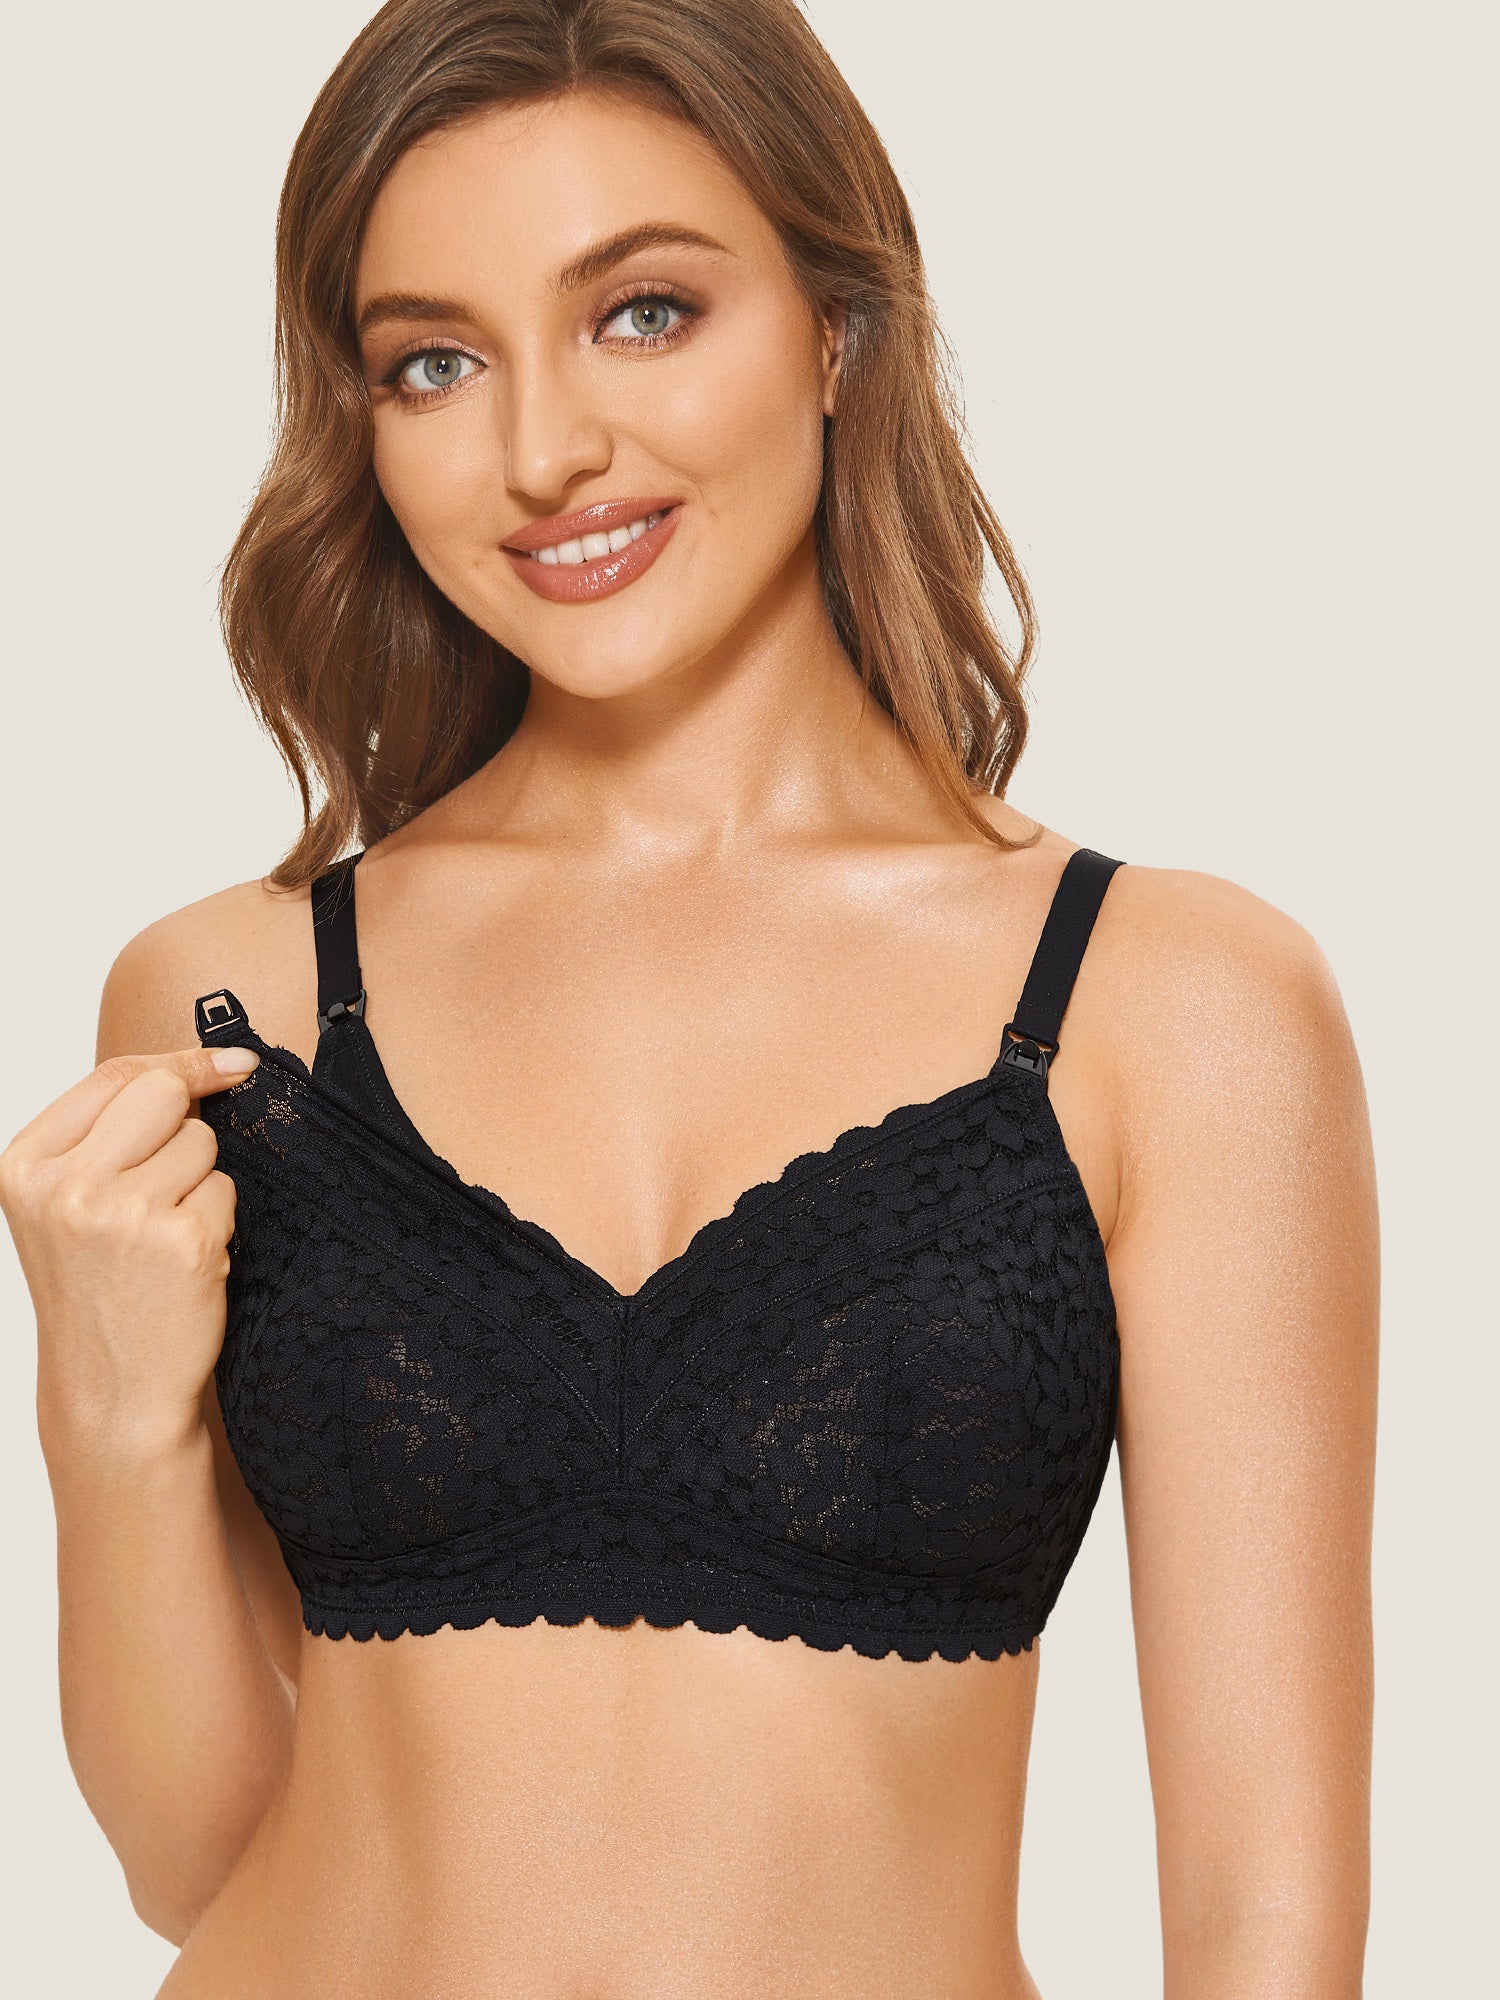 Lace Hands Free Pumping Bra